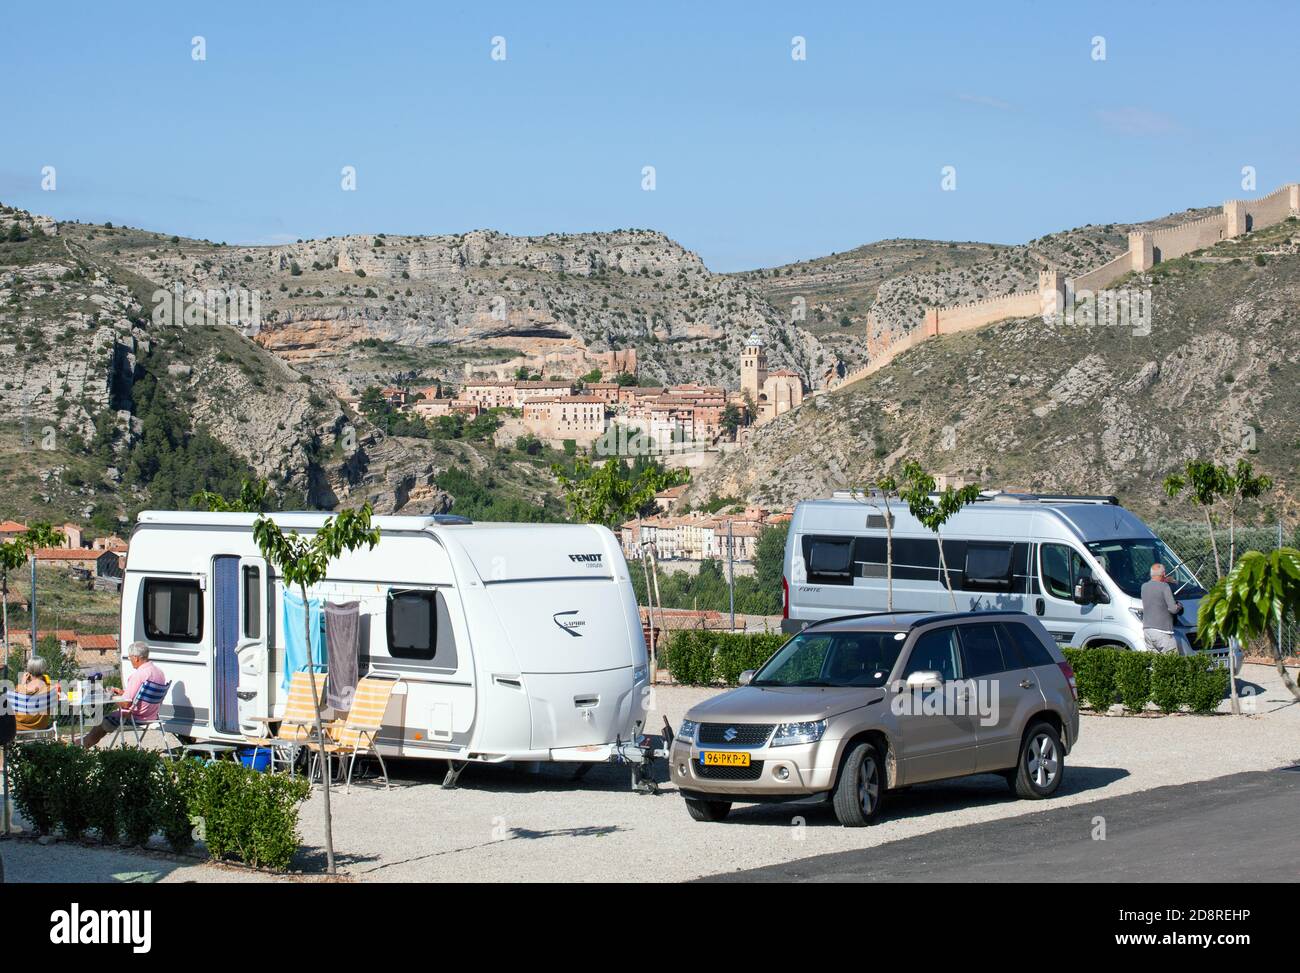 View of the medieval city walls of the Spanish Moorish town of Albarracin from the  Camping  and caravan site of Ciudad De Albarracín Spain Stock Photo